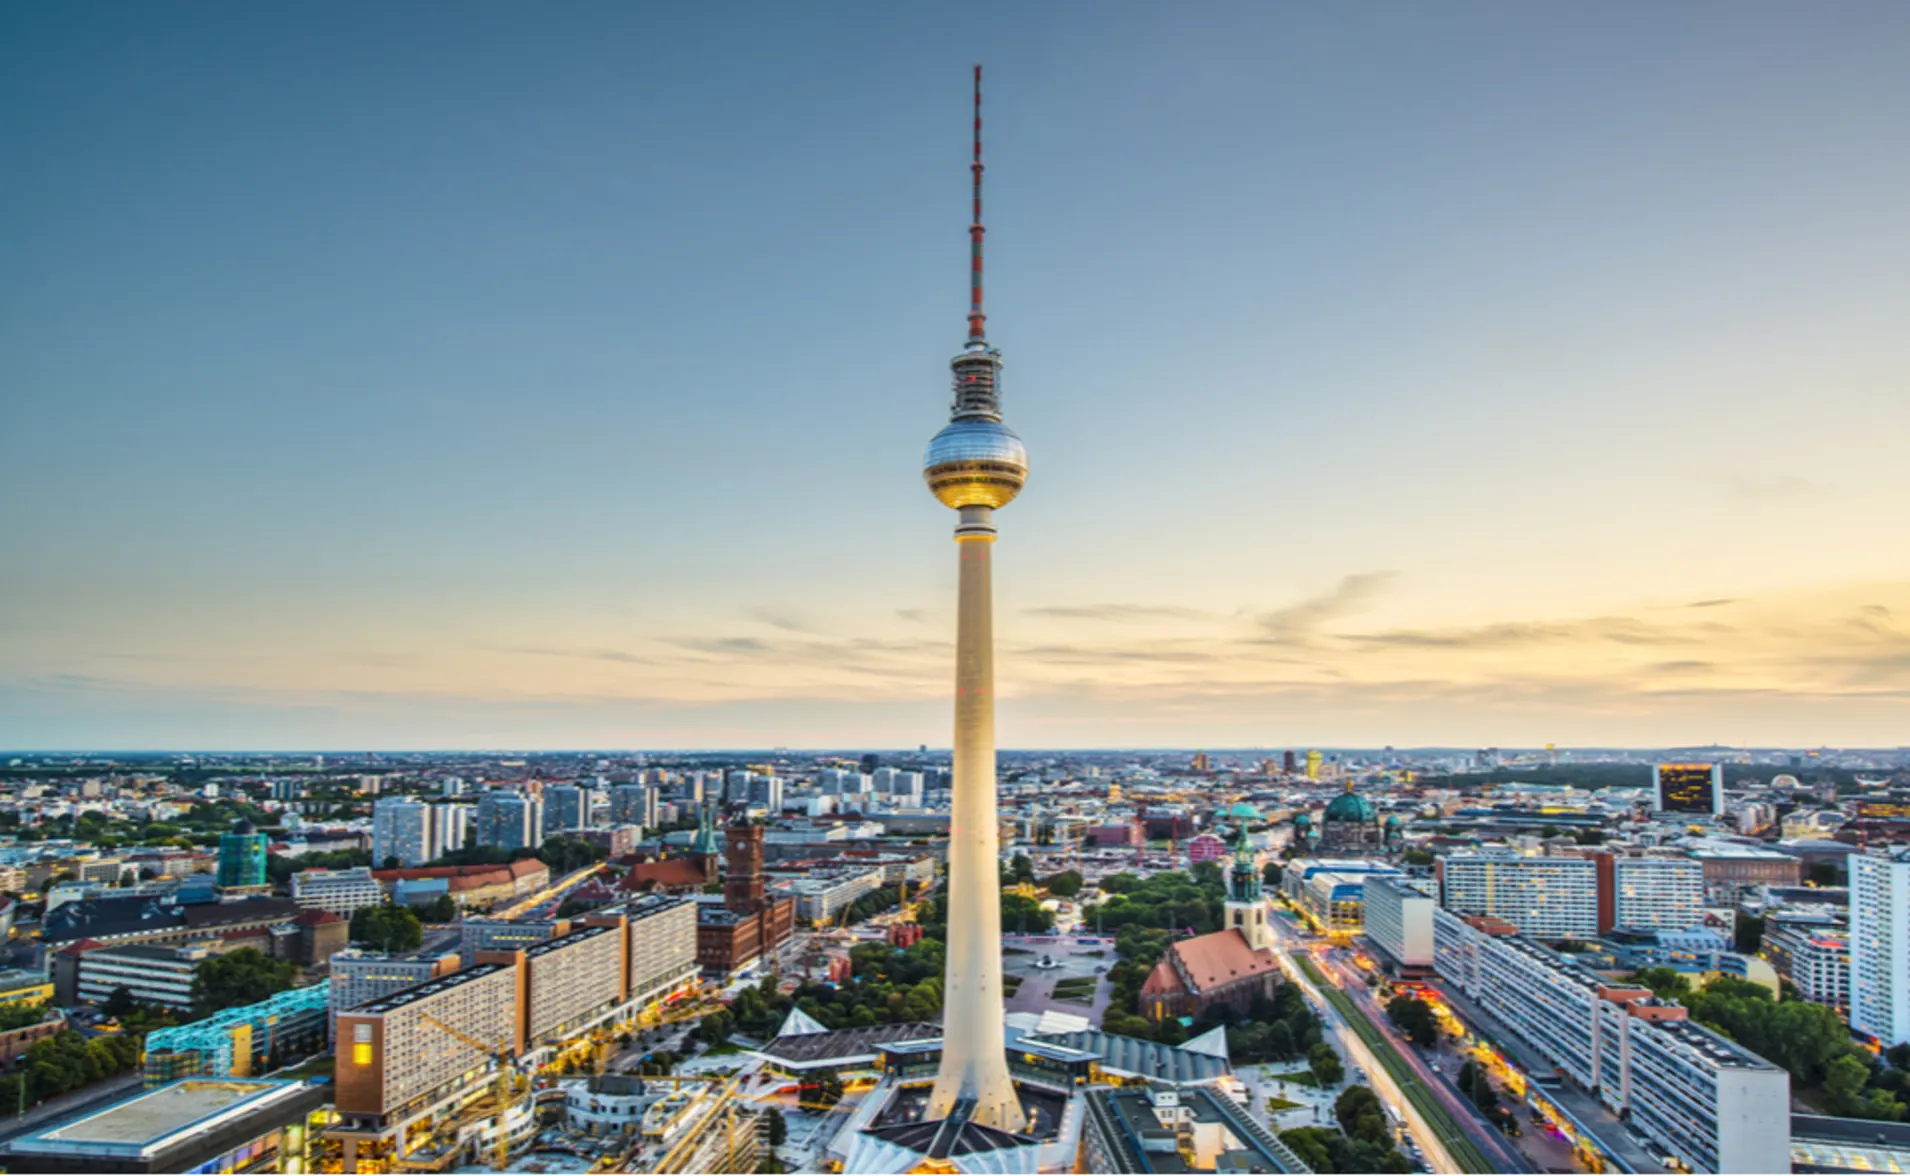 The Television Tower in Berlin at Sunrise